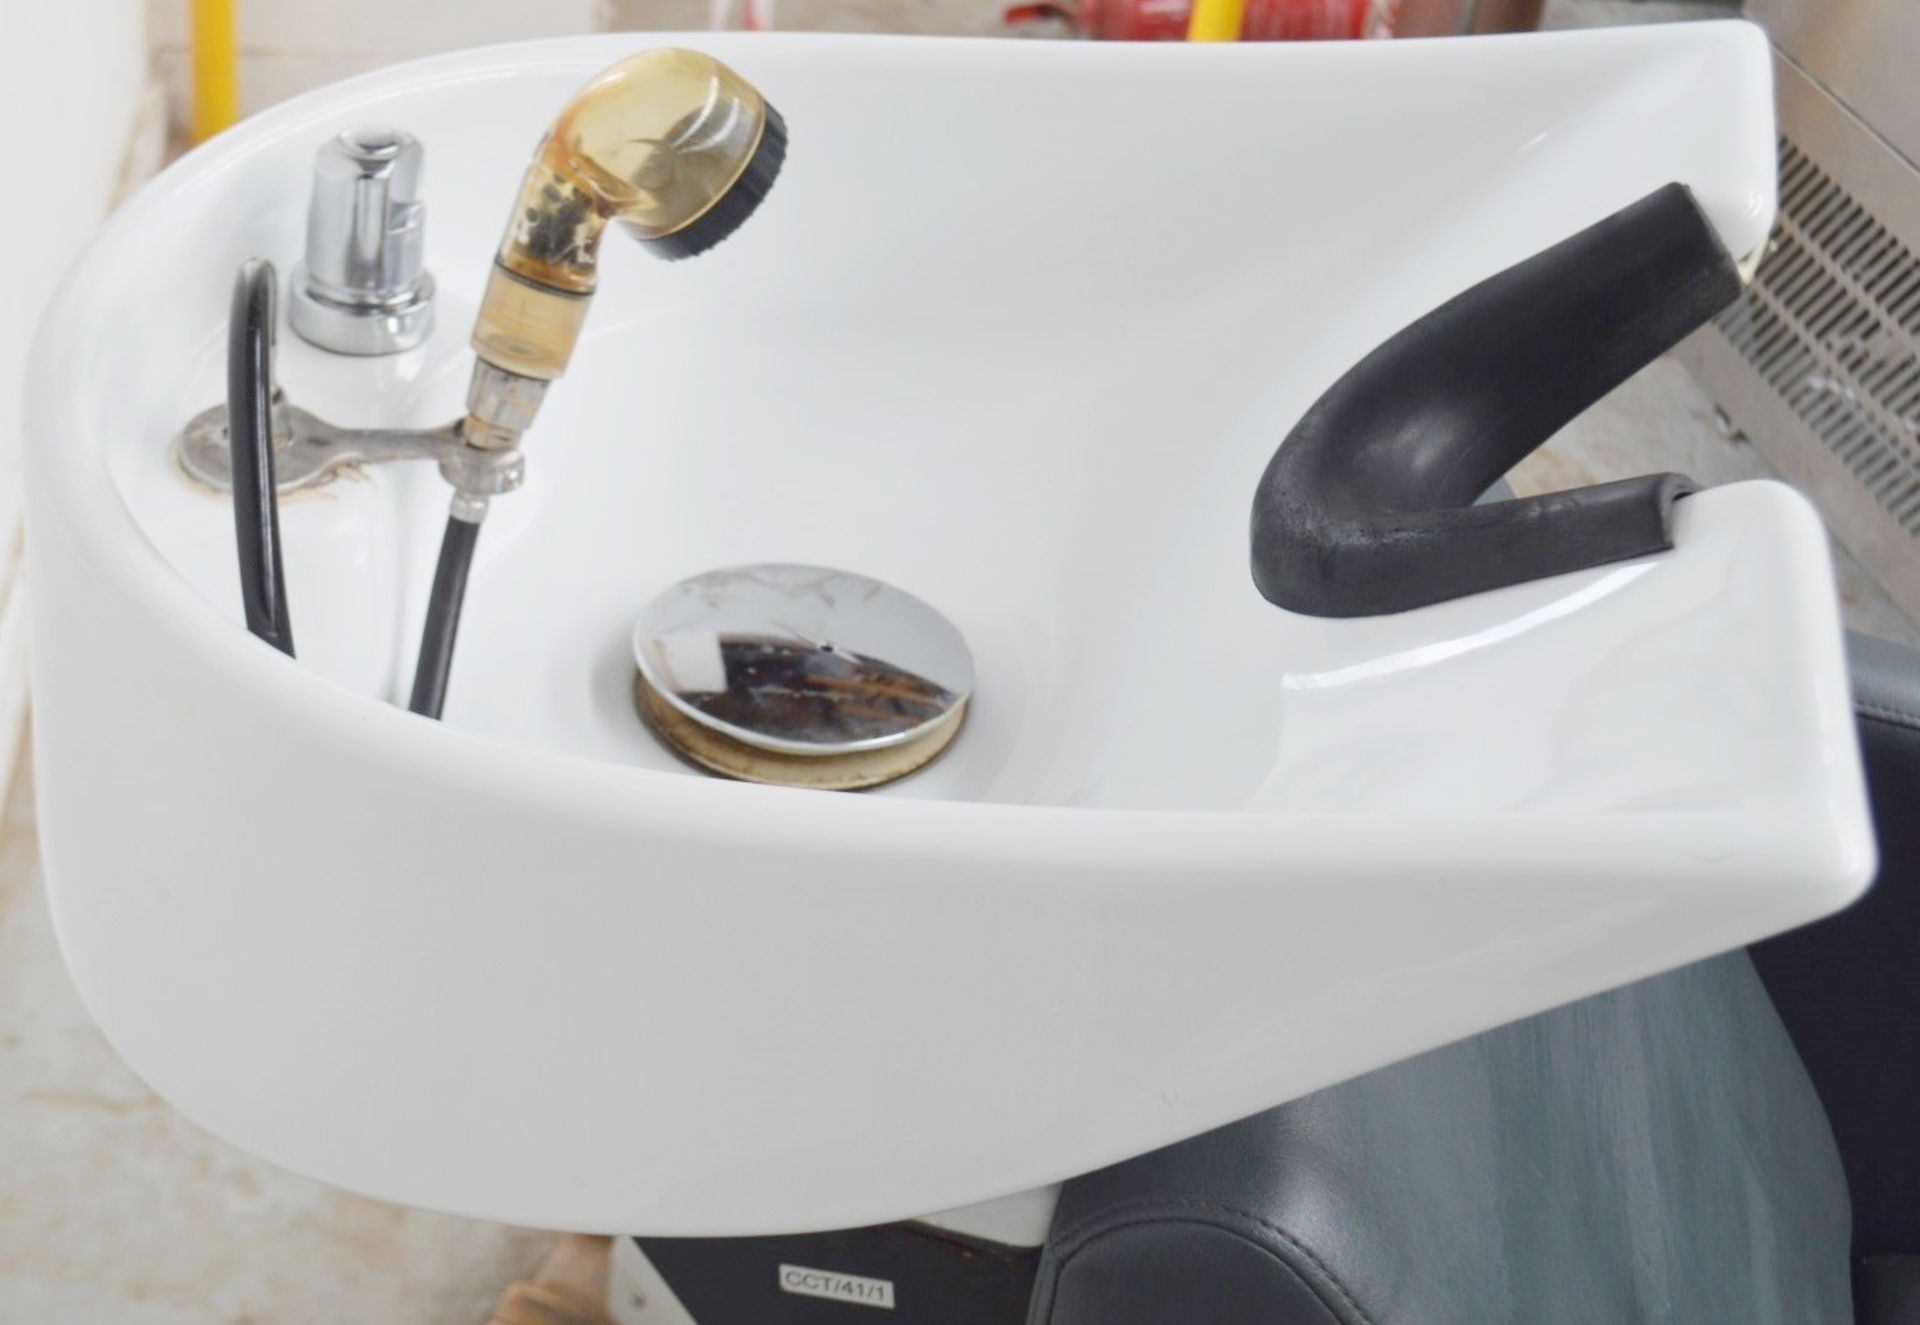 1 x Professional Reclining Hair Washing Chair With Basin Shower And Foot Rest - Image 12 of 19